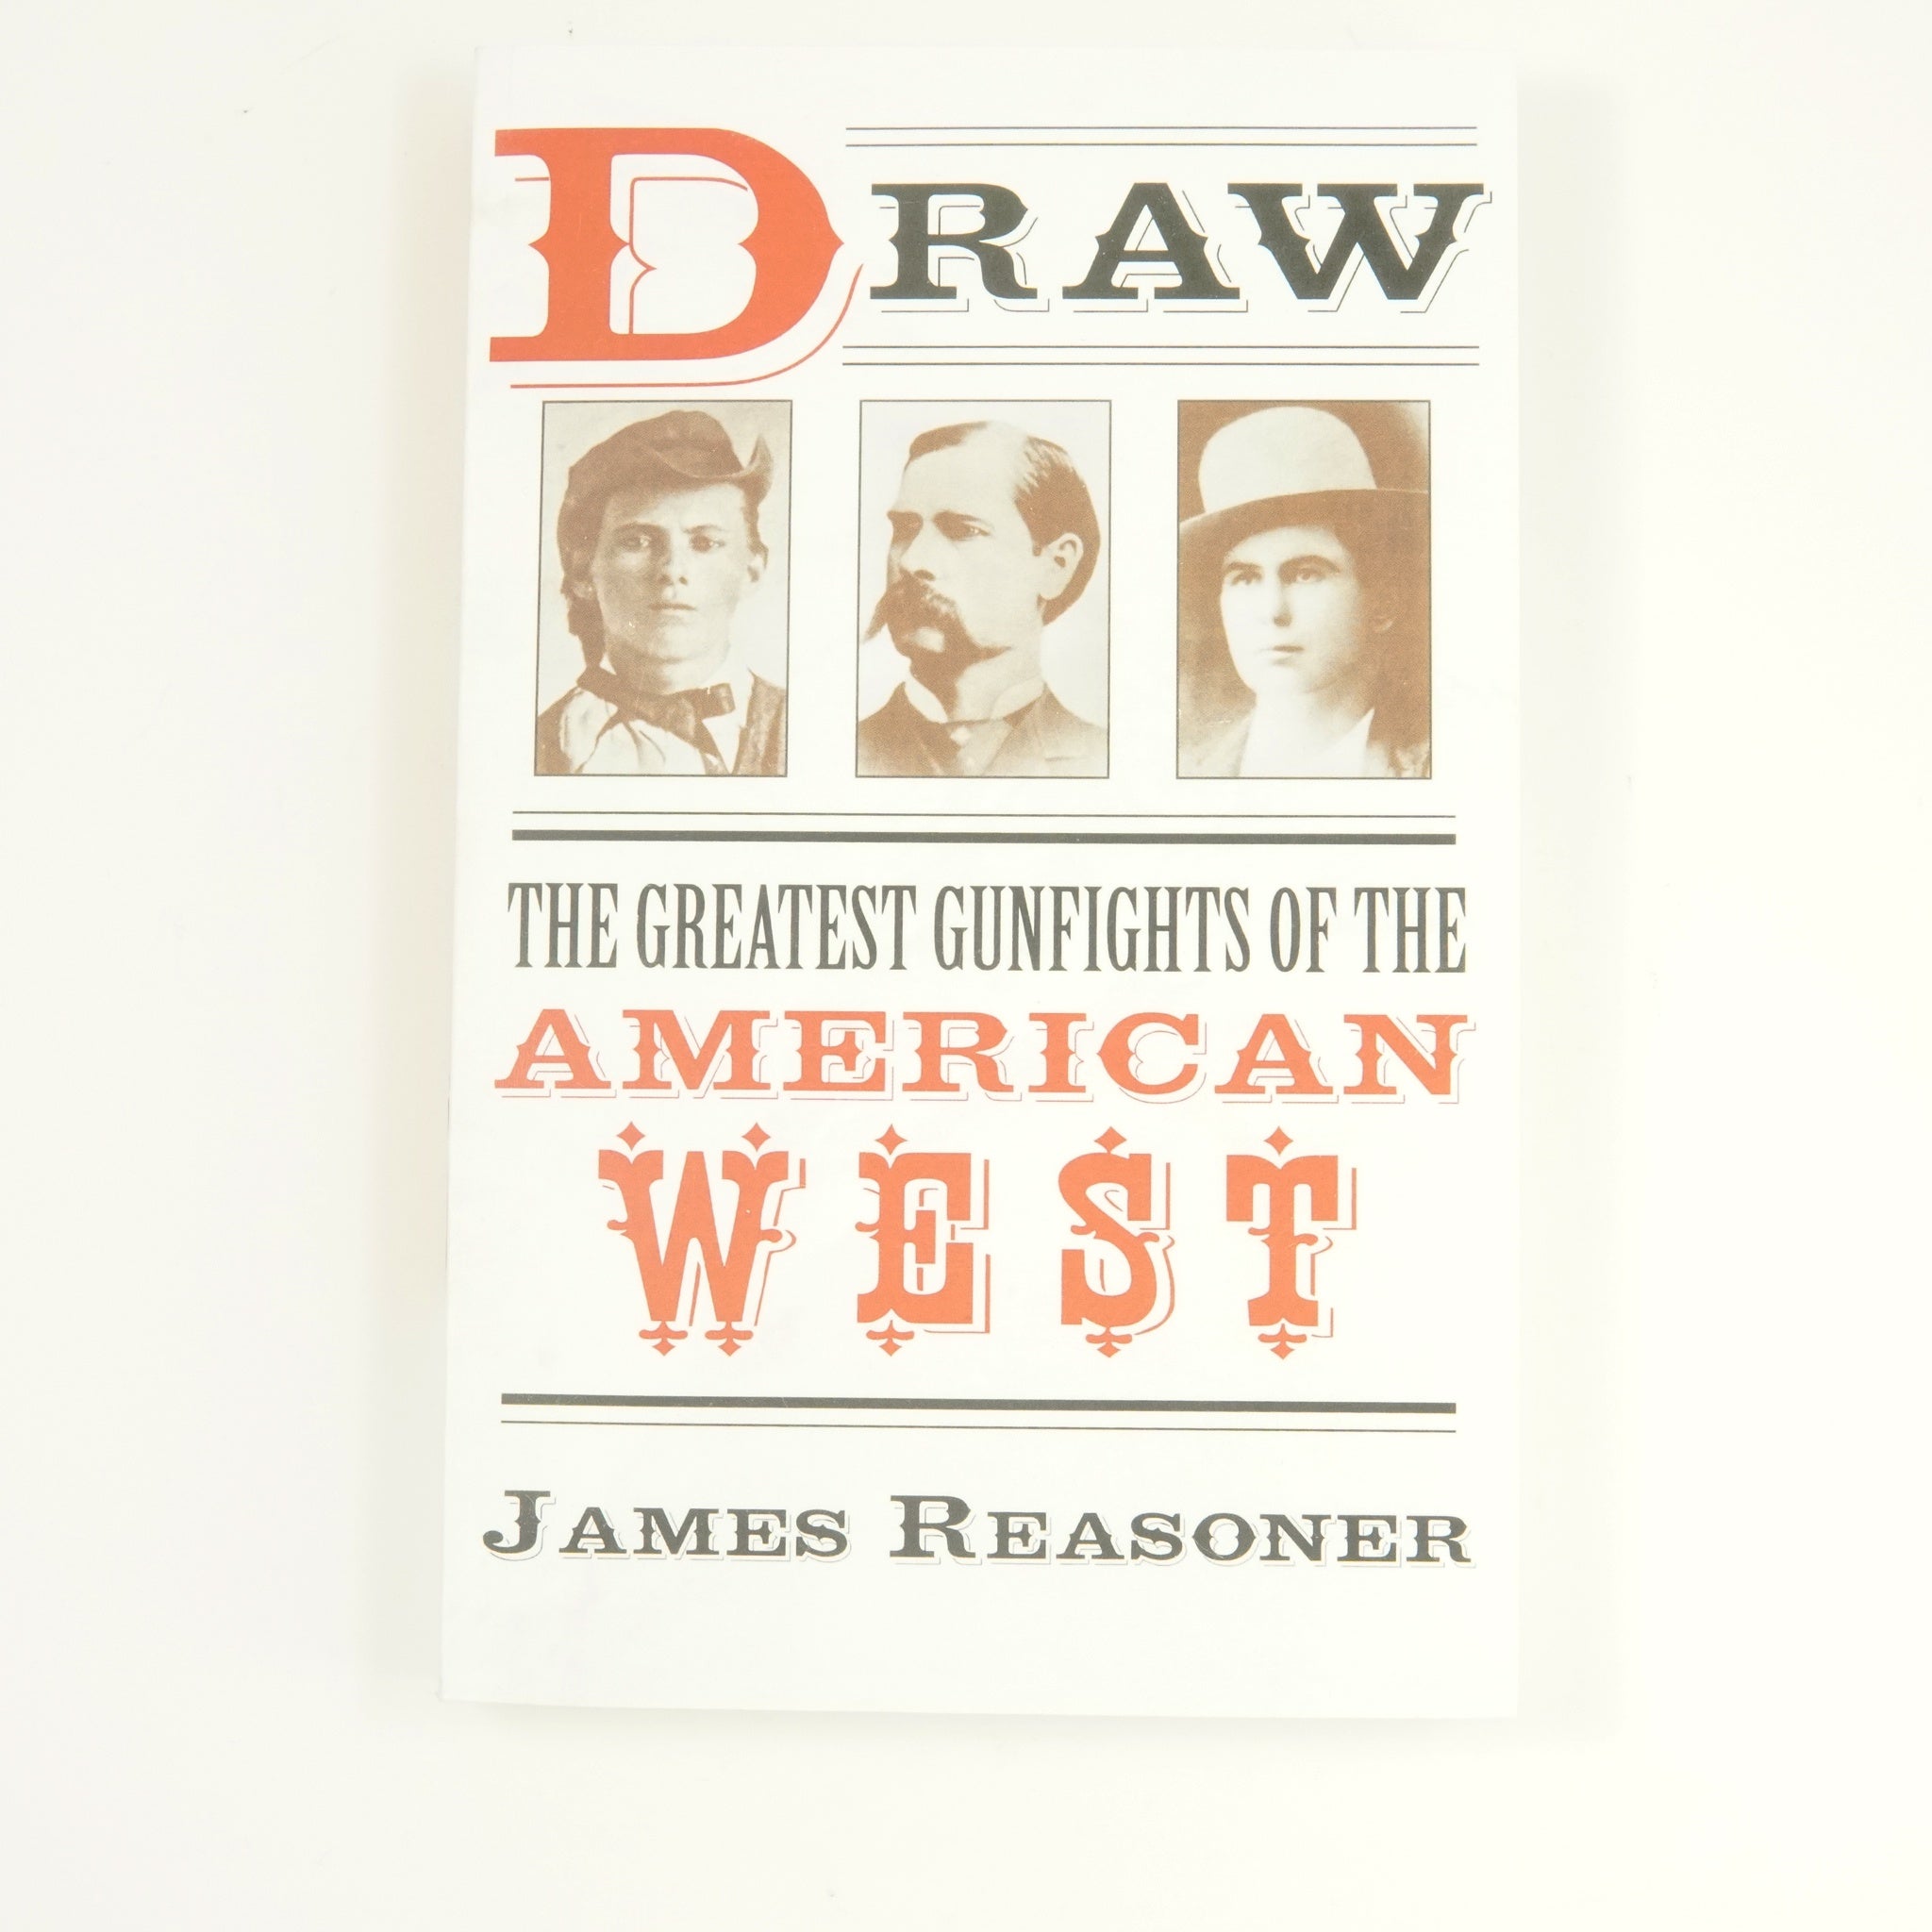 BK 8 DRAW: THE GREATEST GUNFIGHTS OF THE AMERICAN WEST BY JAMES REASONER #21034269 D2 SEPT23